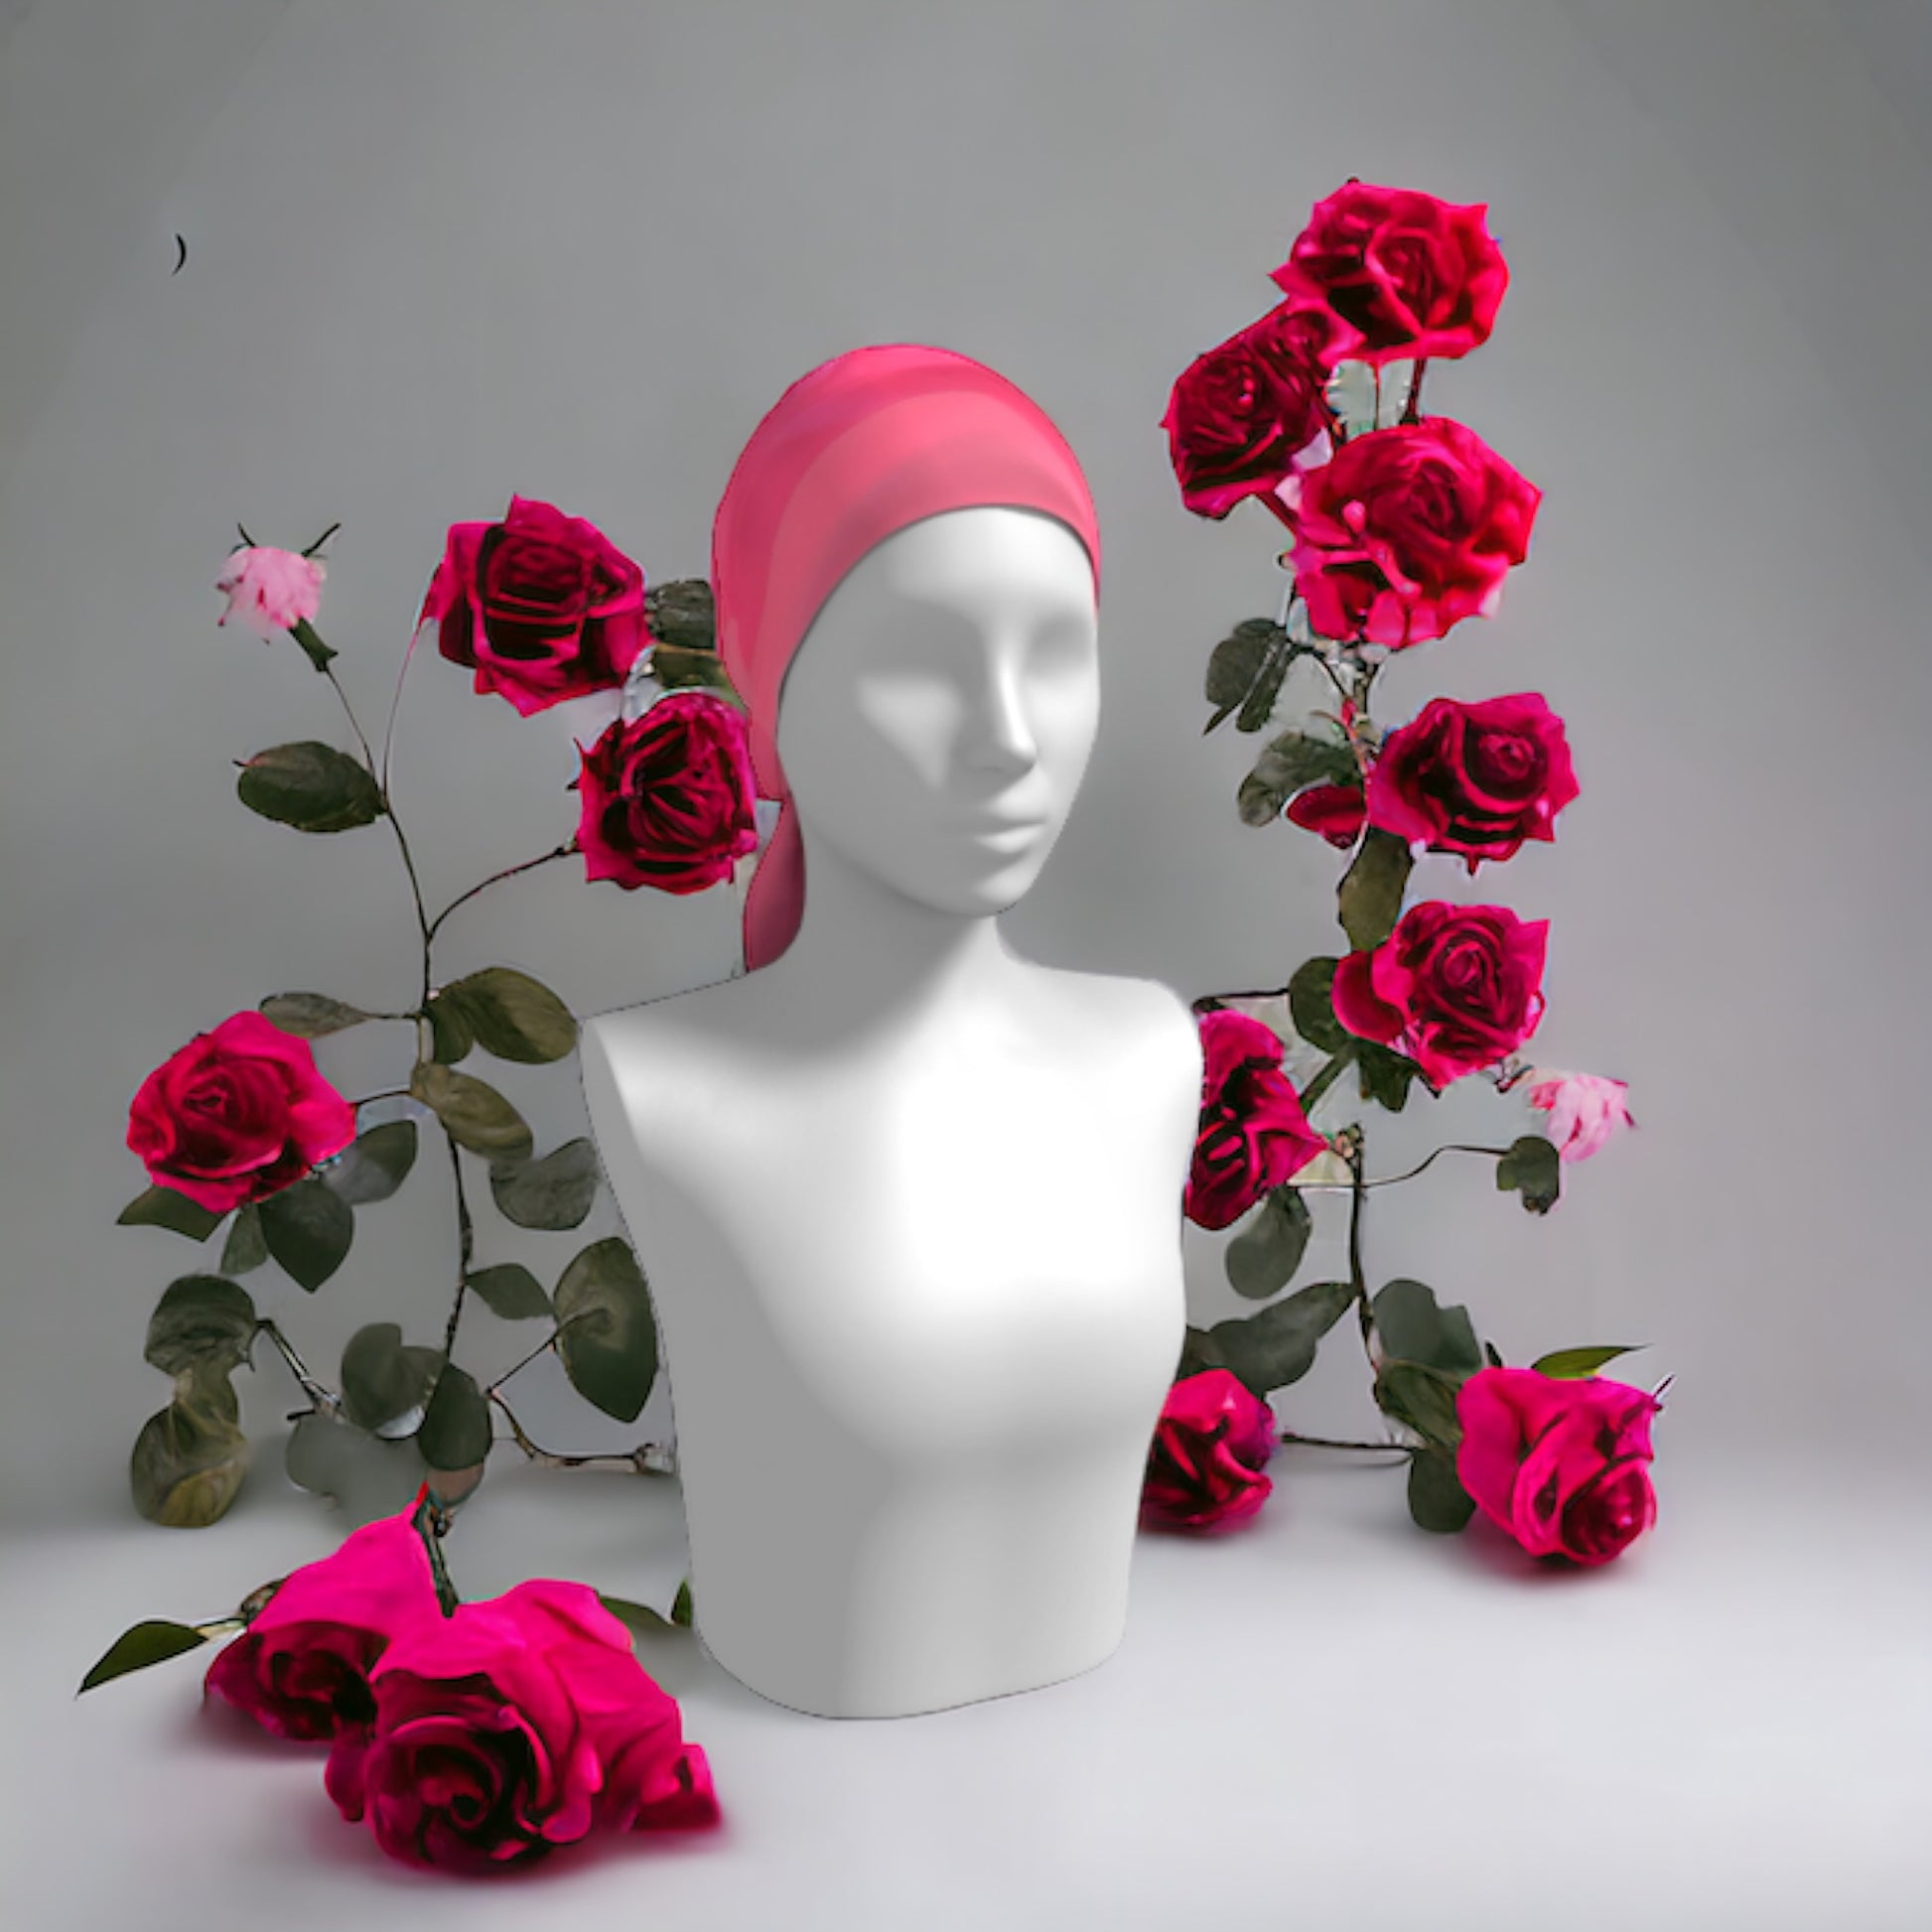 Soft rose long scarf is shown worn as a head wrap.